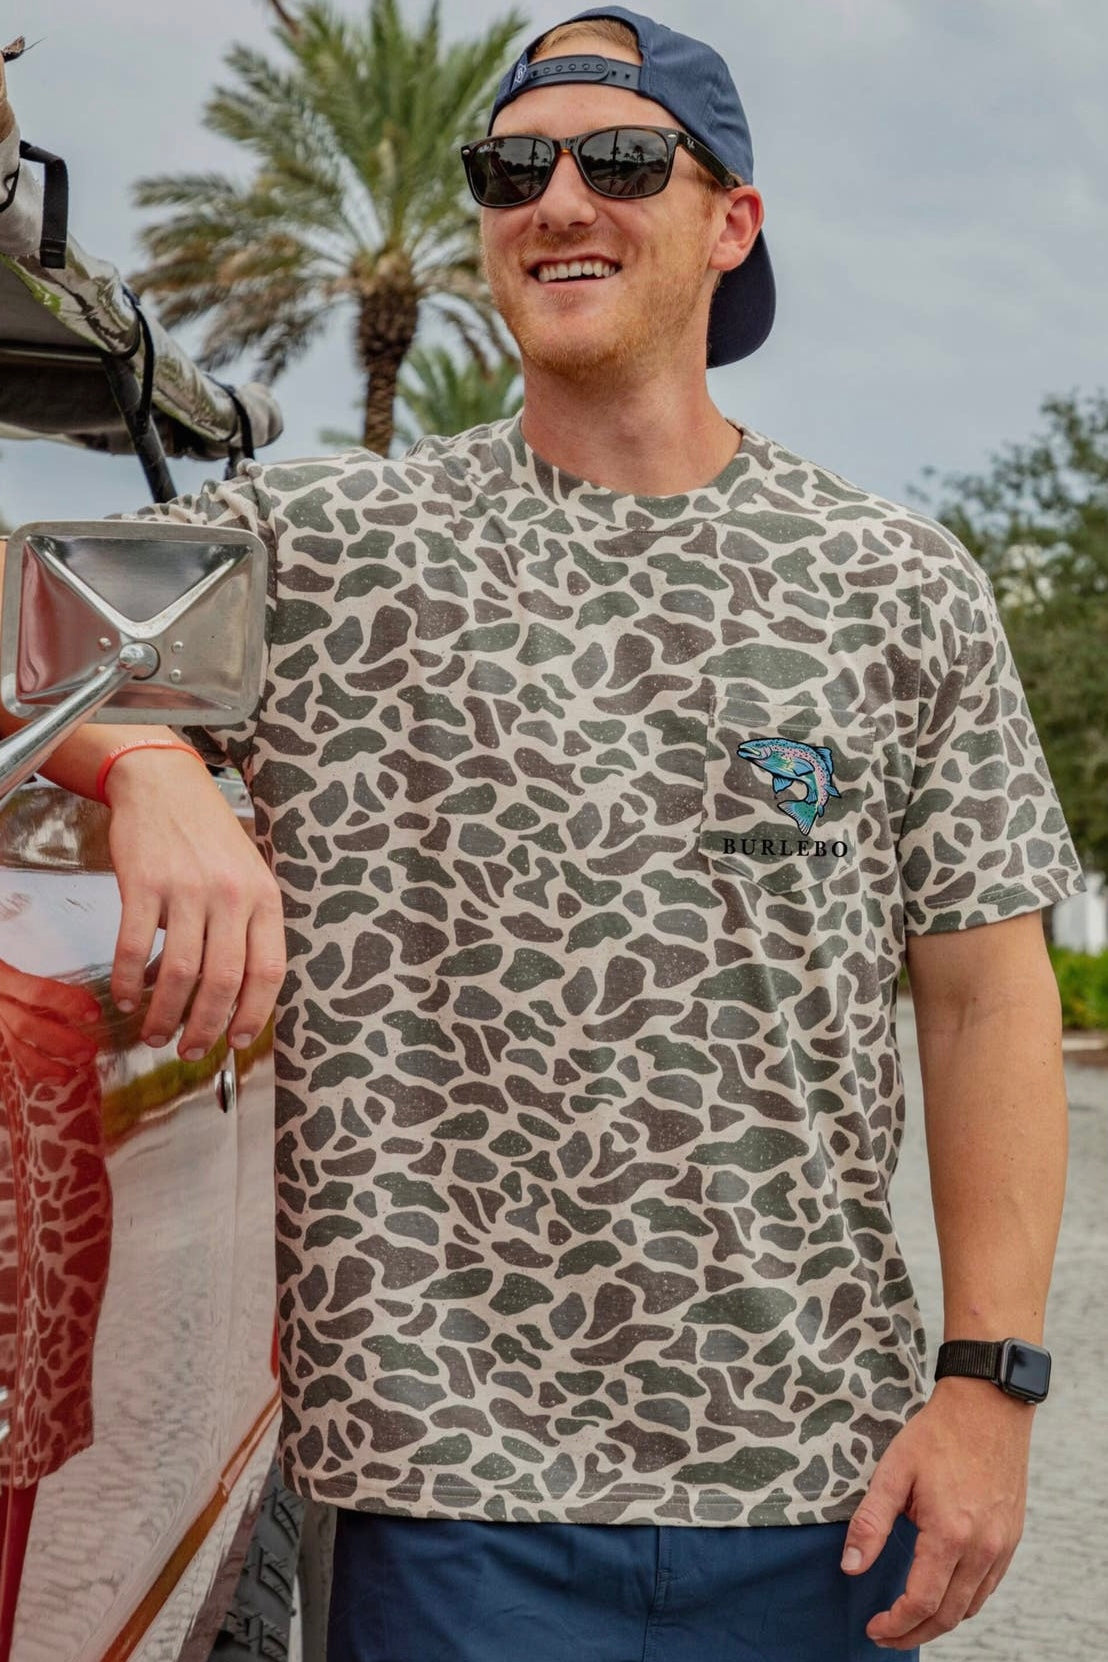 Burlebo Trout Patch Camo Tee